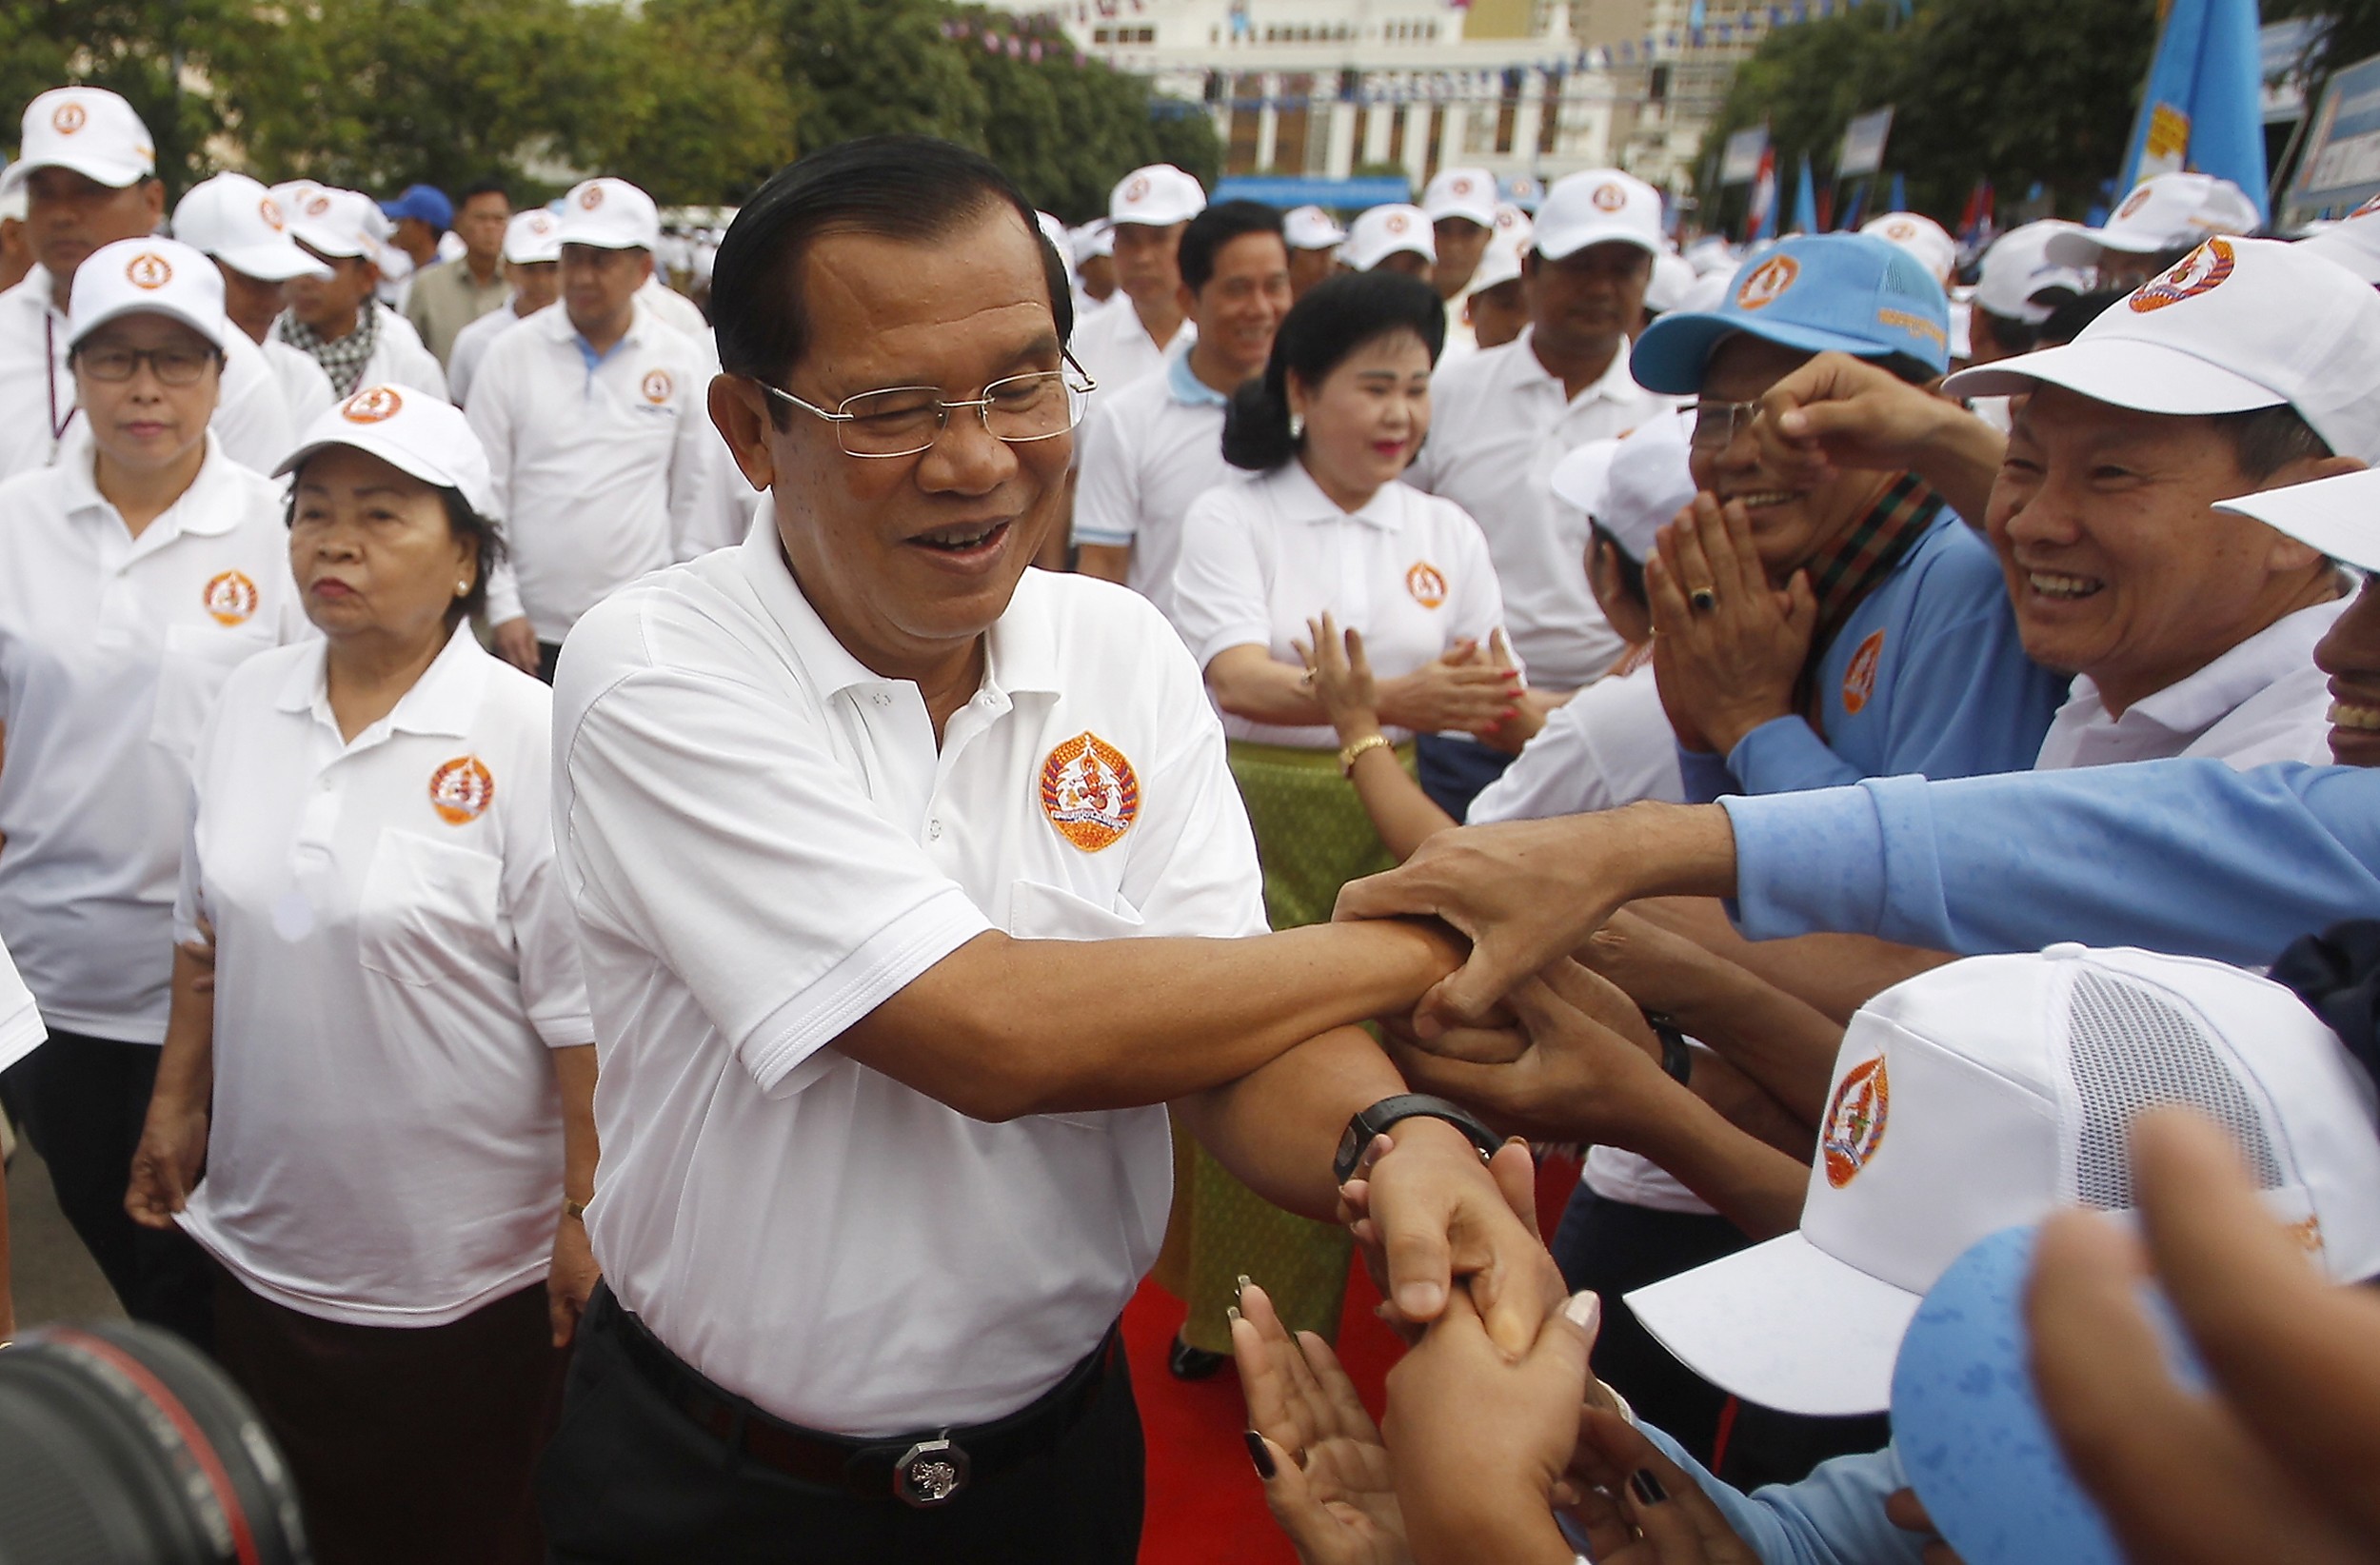 Cambodian Prime Minister Hun Sen greets supporters at a campaign rally on July 7. His Cambodian People’s Party is expected to sweep the polls after the government dissolved the main opposition party. The Cambodian strongman is at the peak of a reign that began in 1985. Photo: AP